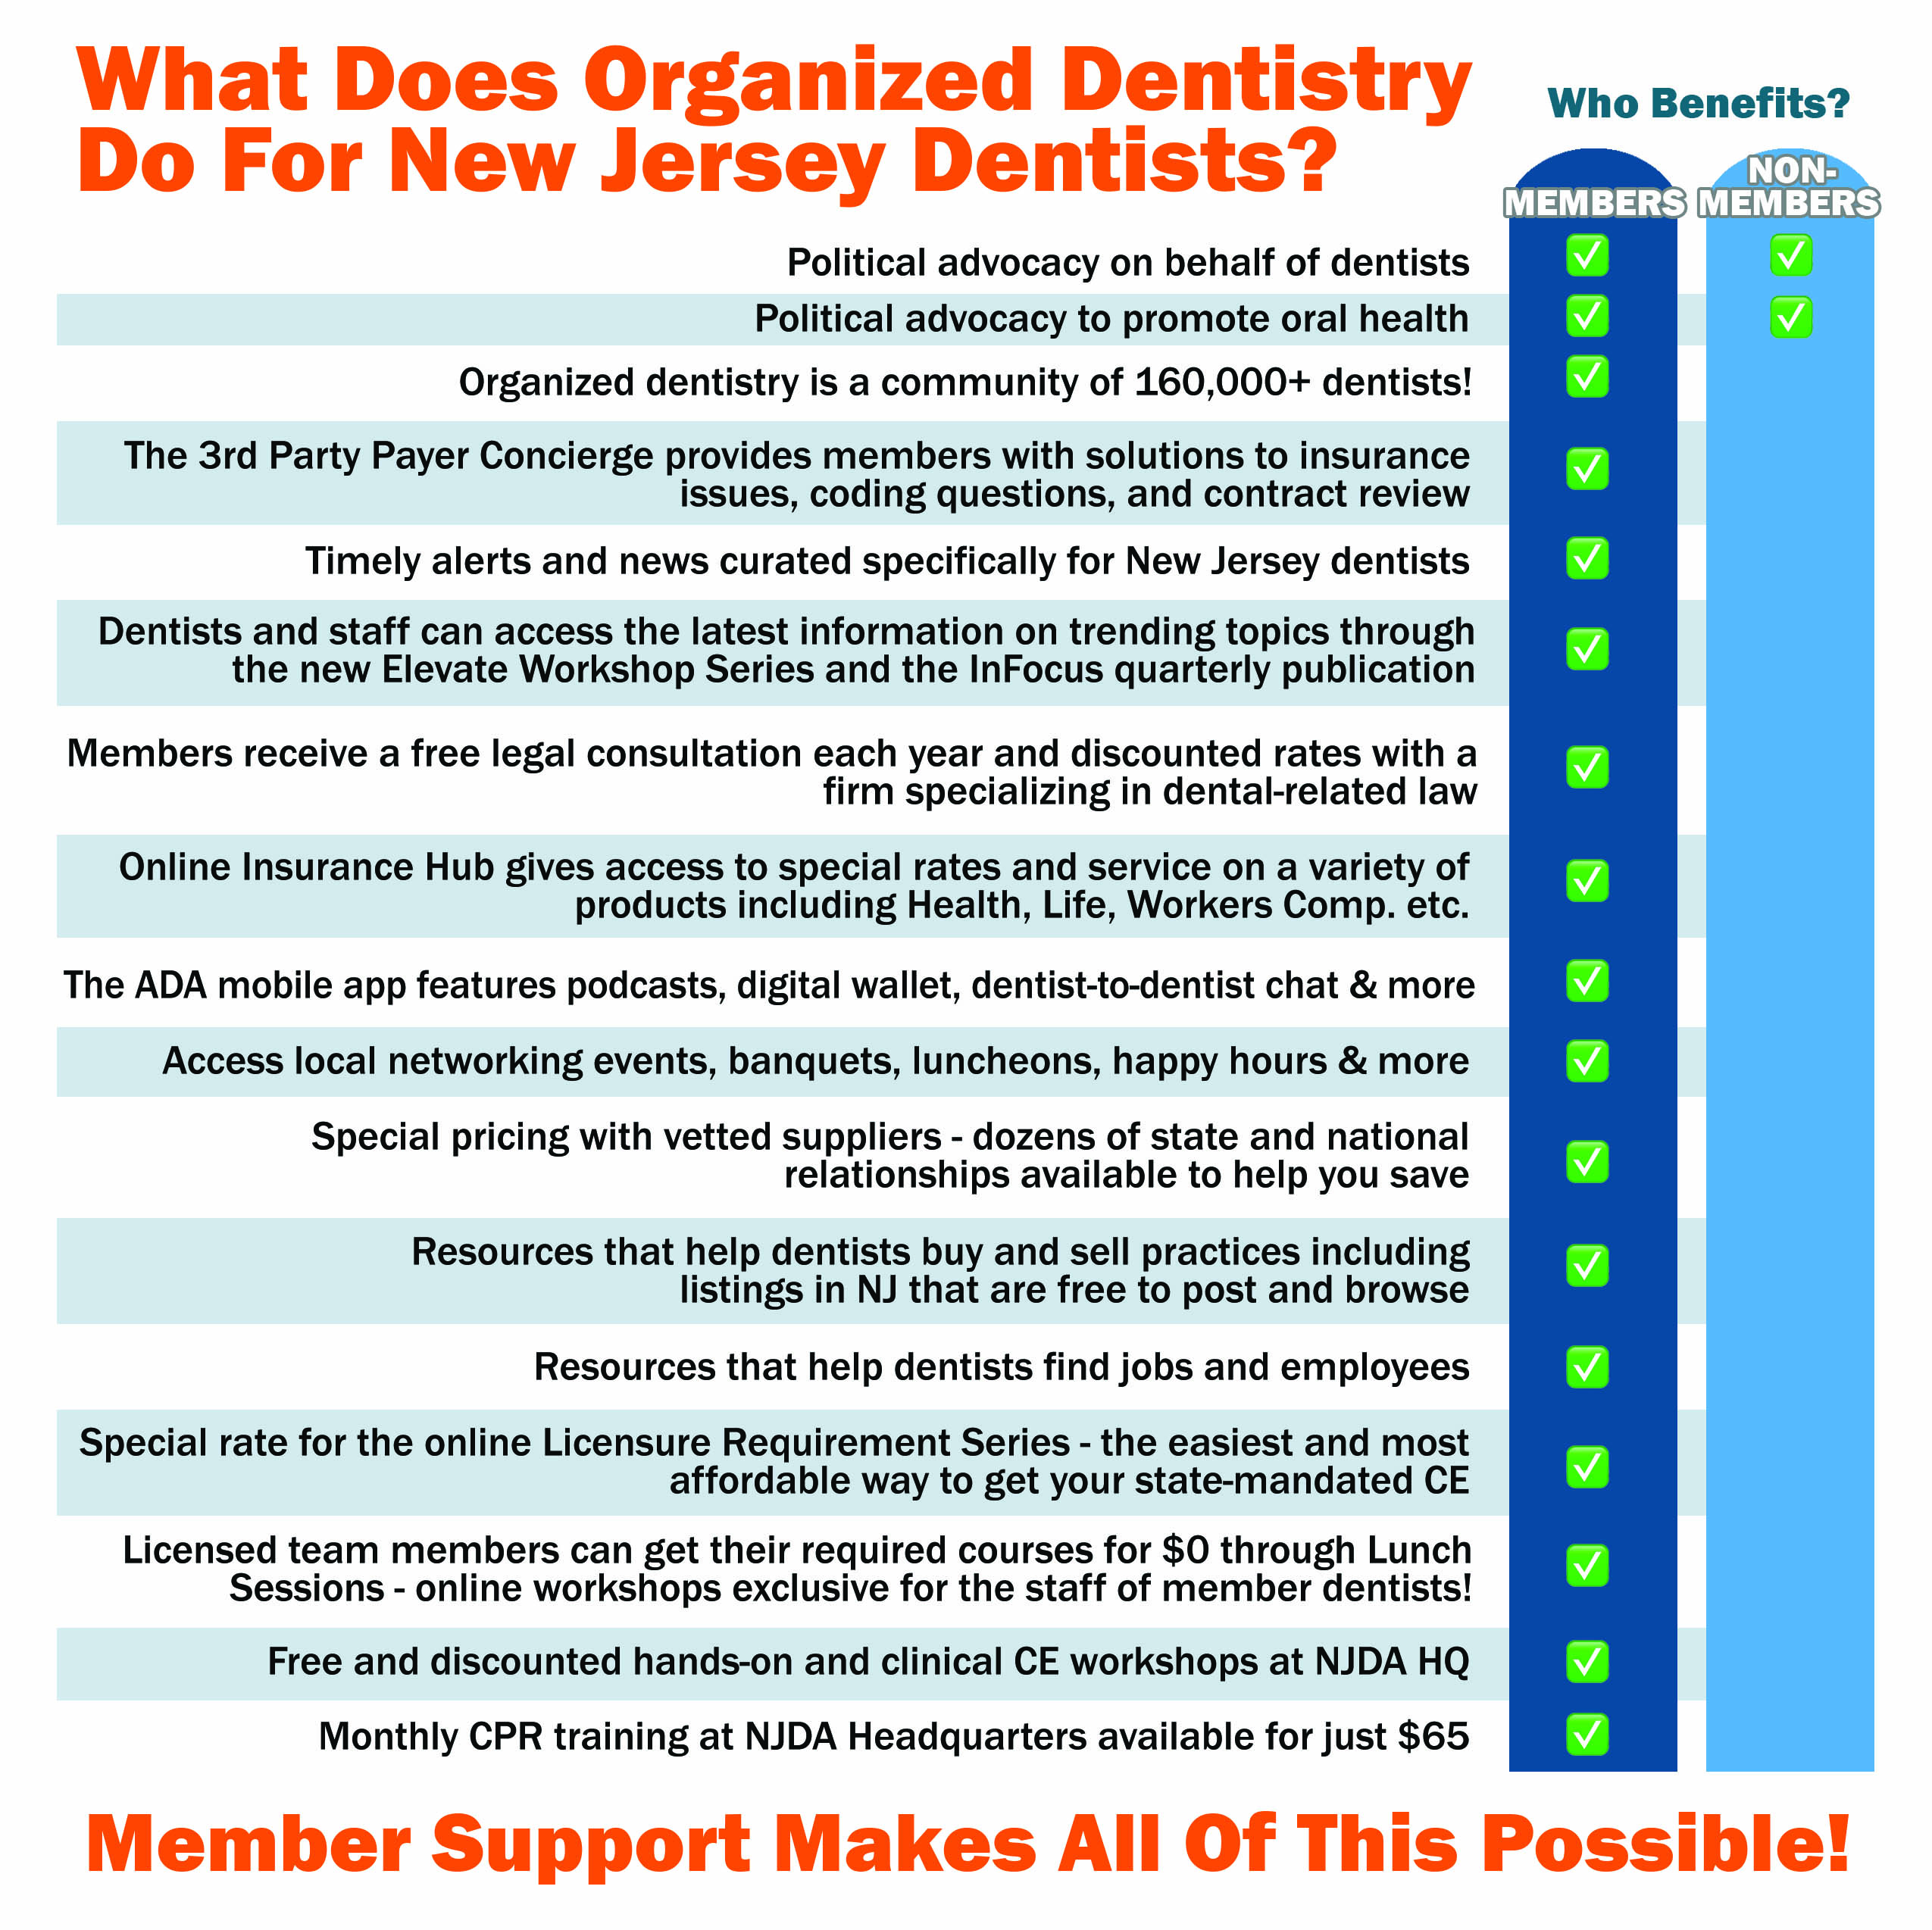 What does organized dentistry do for New Jersey Dentists?